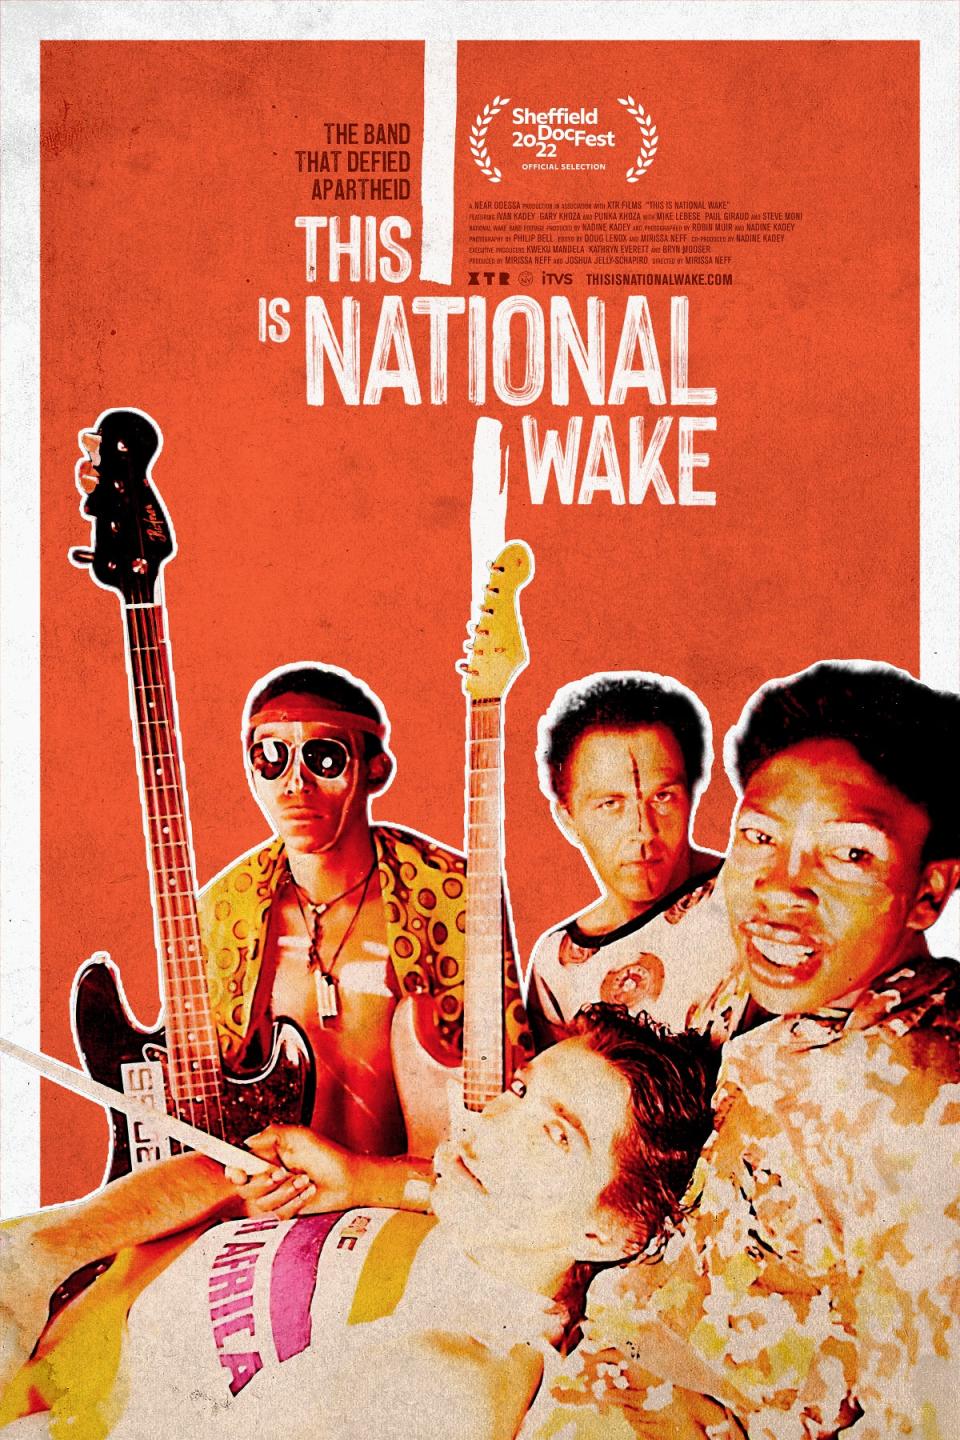 ‘This Is National Wake’ director Mirissa Neff: ‘These were people who were not even supposed to be together, yet they formed for the love of music across race lines when it was illegal to do so' (This Is National Wake)